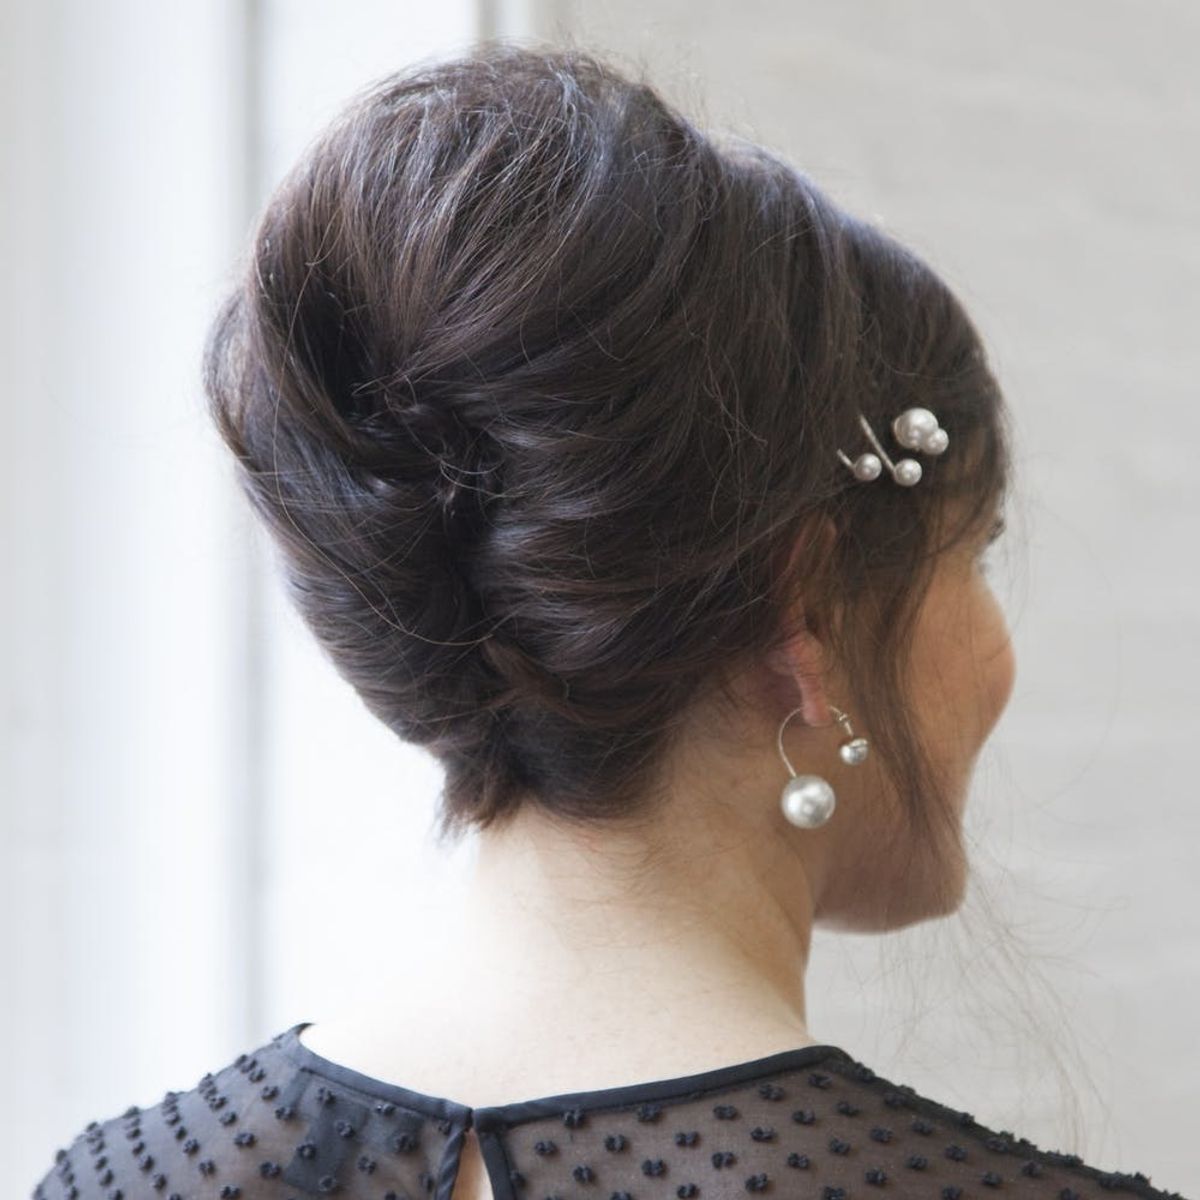 Fancy 5-Minute Updos for Moms Who Don’t Have a Minute to Spare